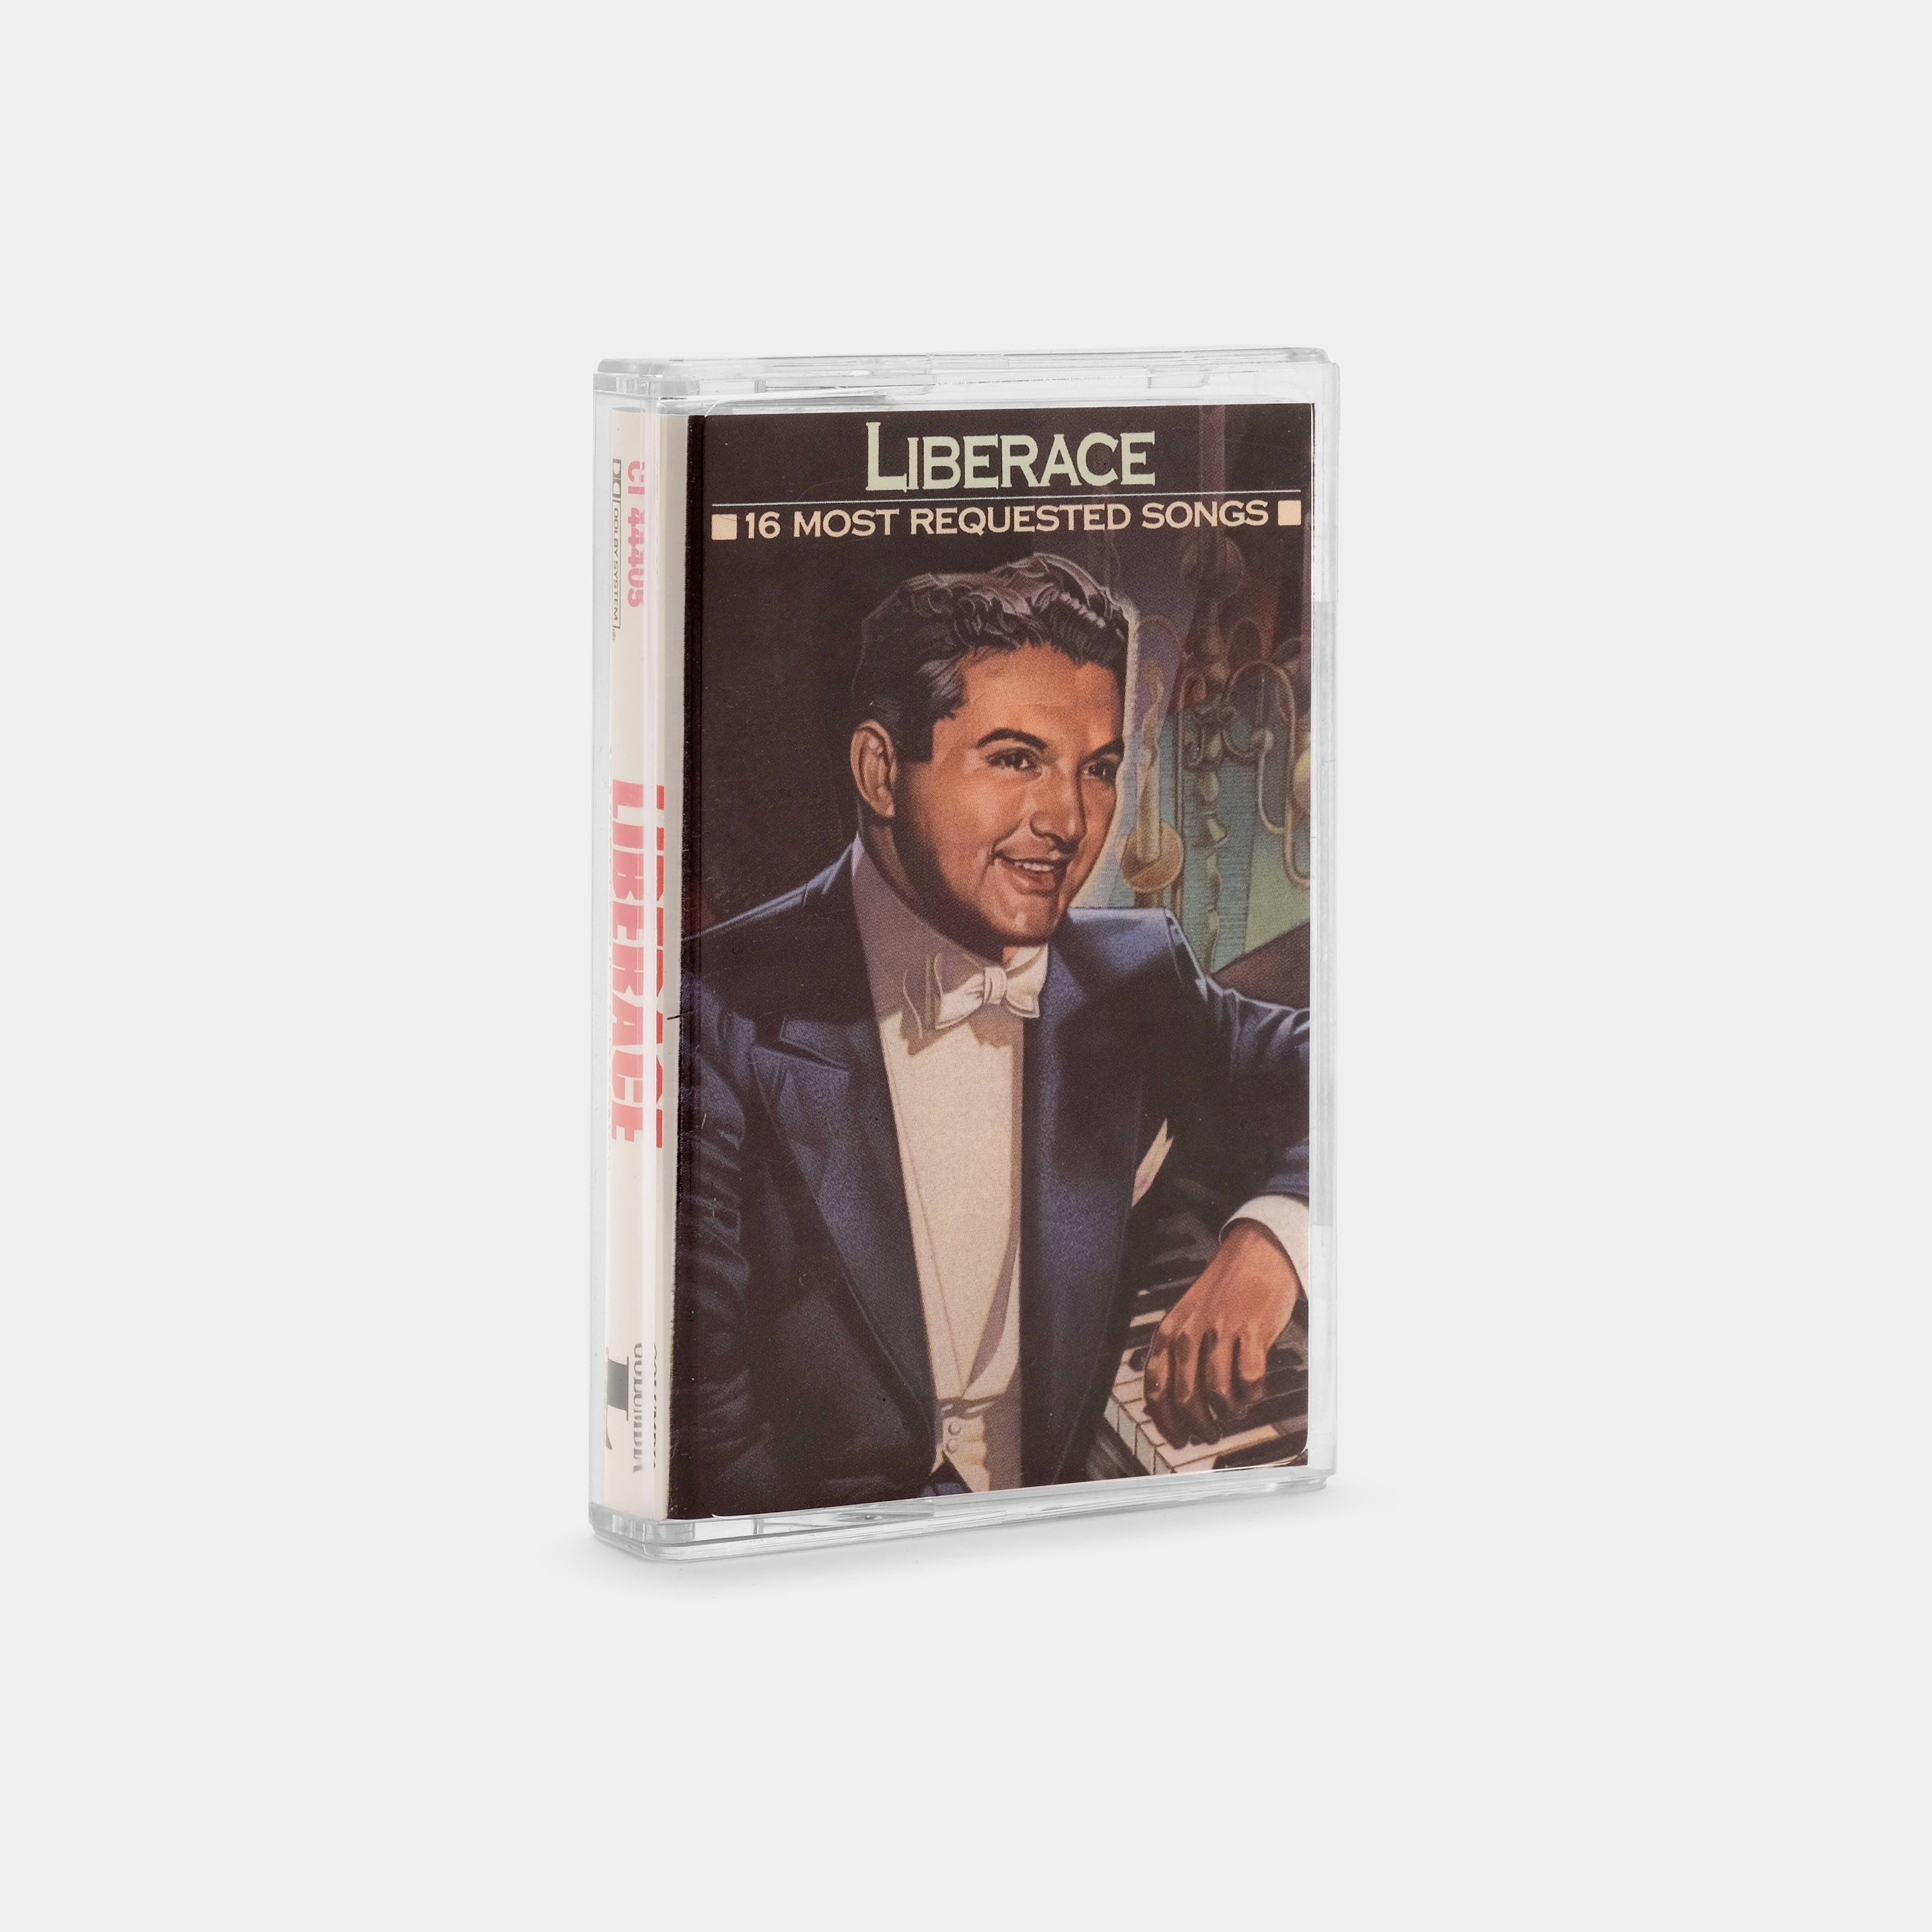 Liberace - 16 Most Requested Songs Cassette Tape